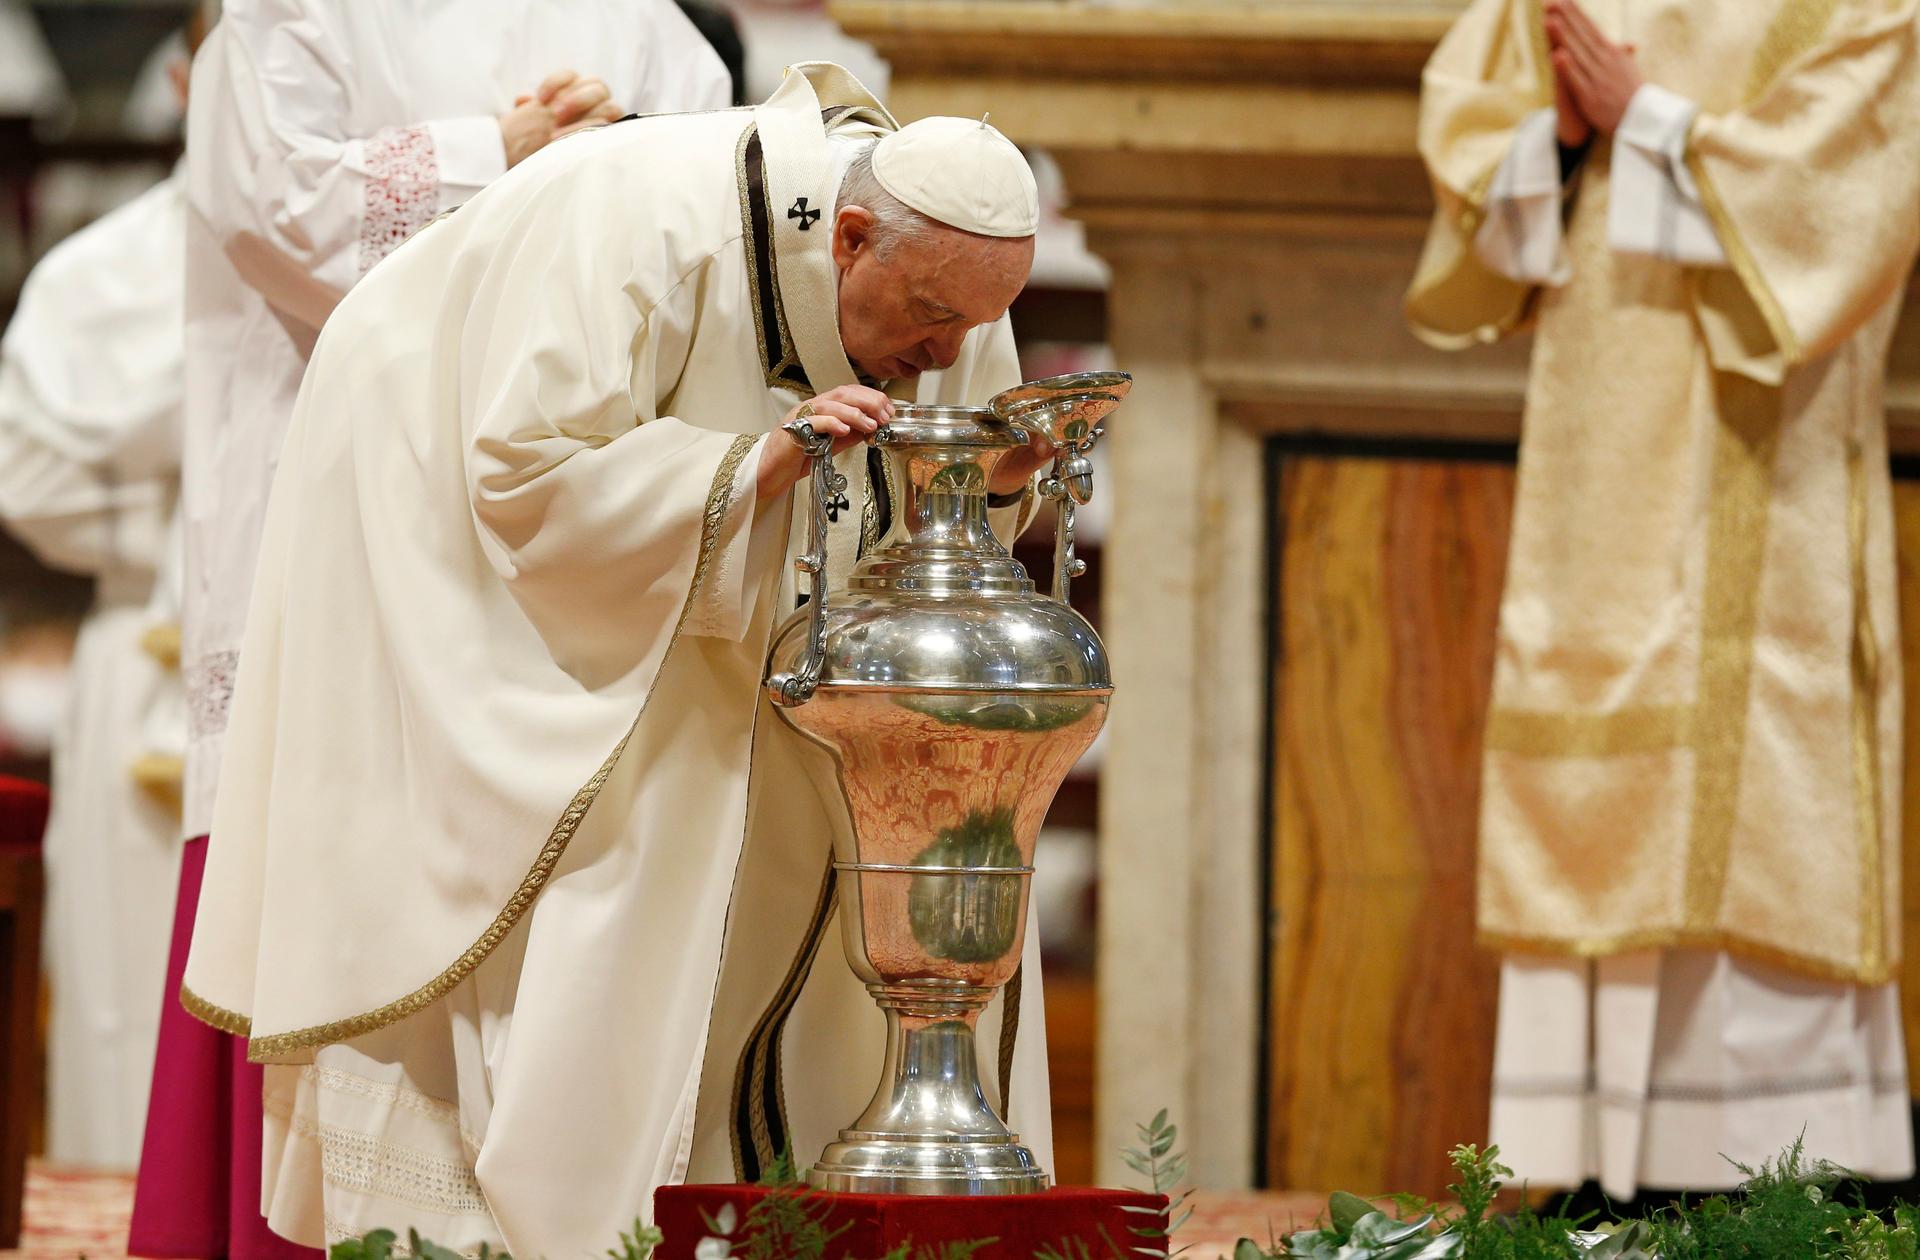 Pope urges priests to avoid ‘idols’ that distract from God